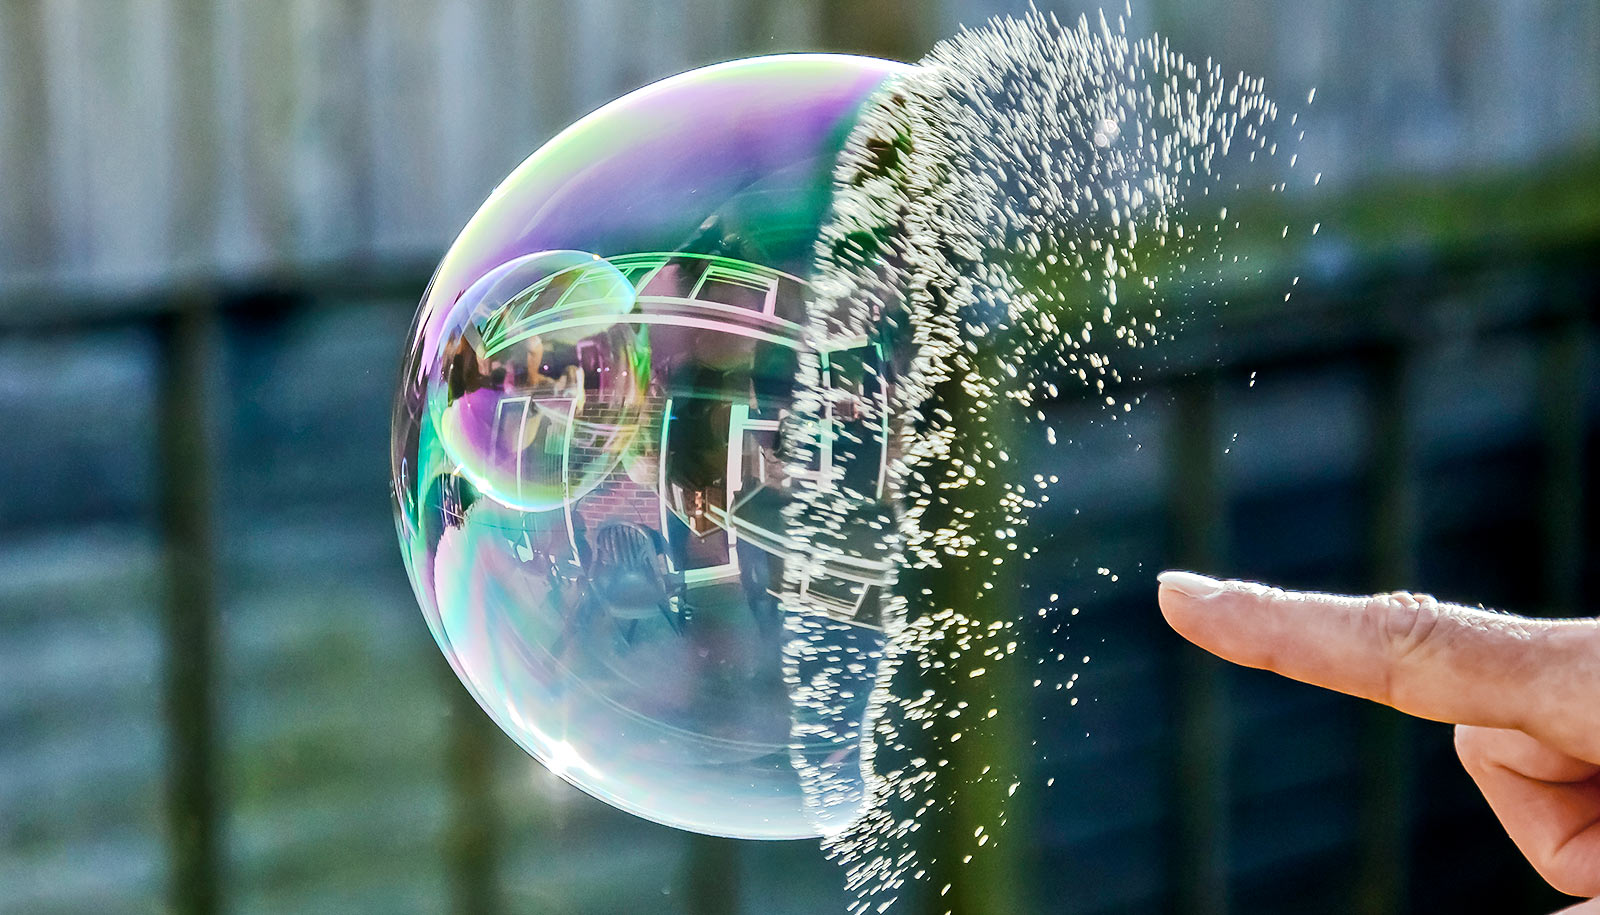 Bursting the Bubble Getty Images the Liberal Bubble